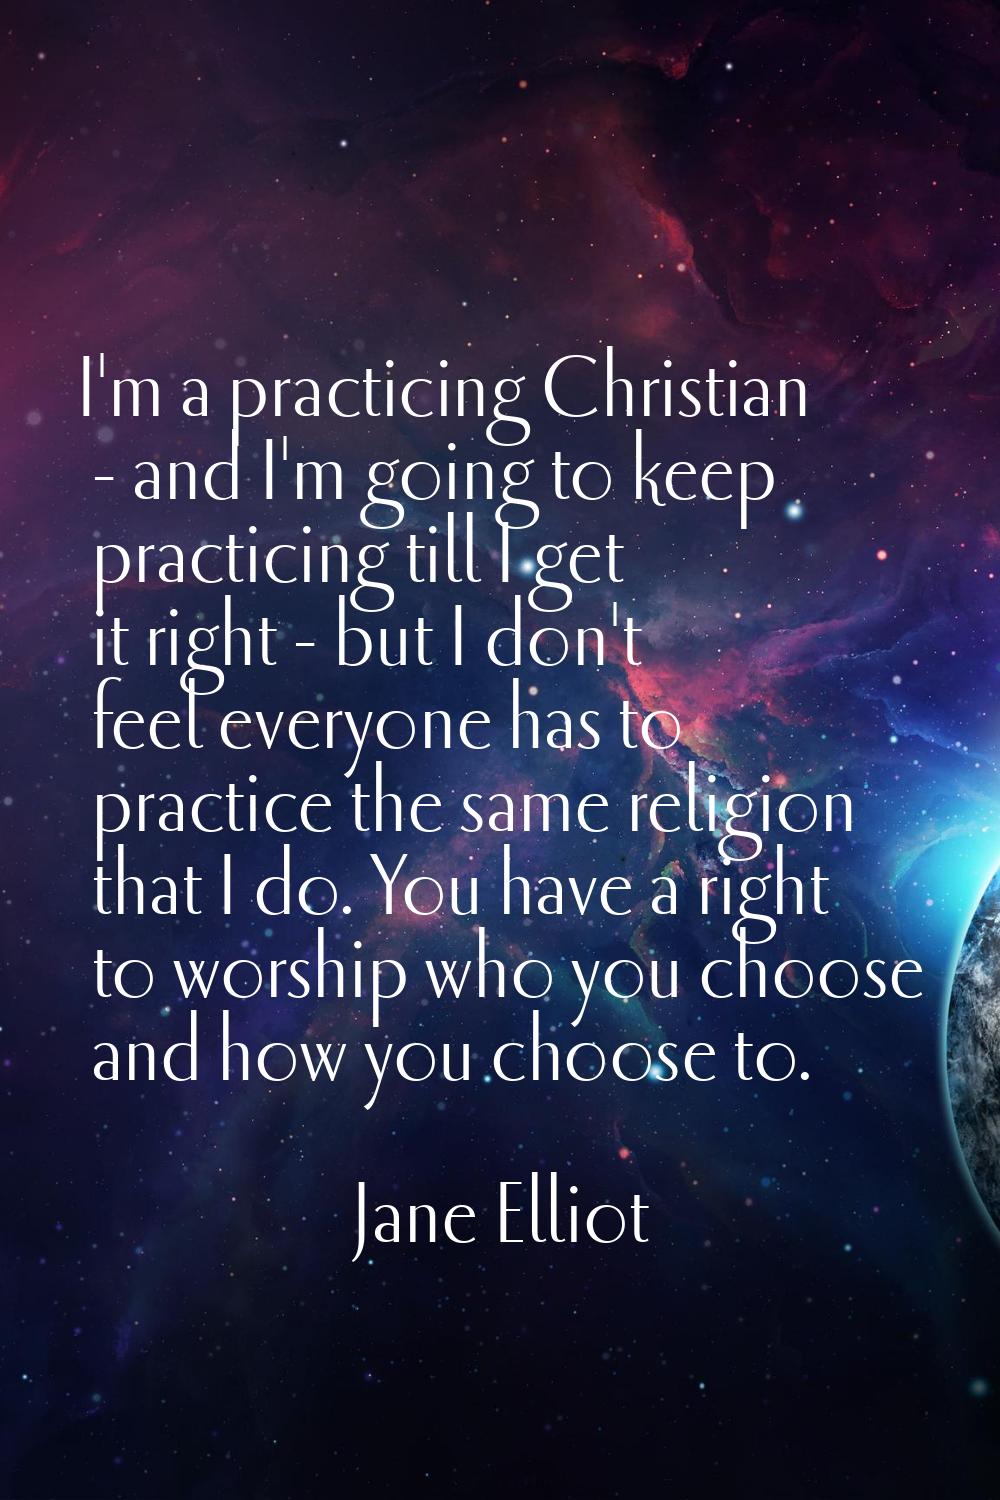 I'm a practicing Christian - and I'm going to keep practicing till I get it right - but I don't fee